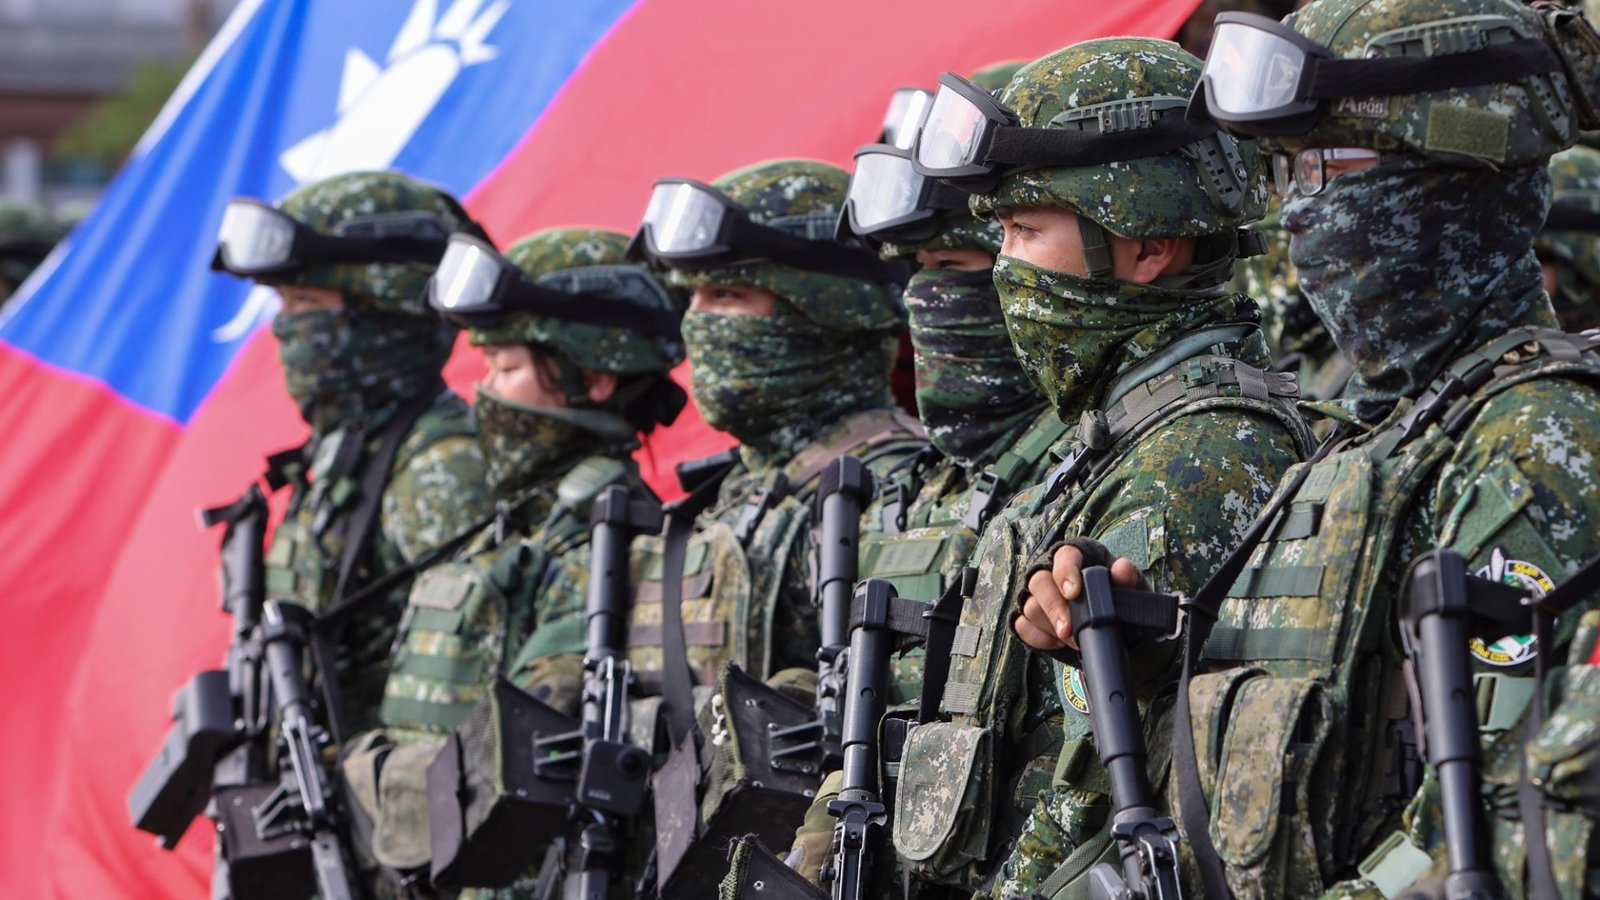 Taiwan is preparing for war – we KNOW China is plotting surprise attack and learning from Putin, foreign minister warns